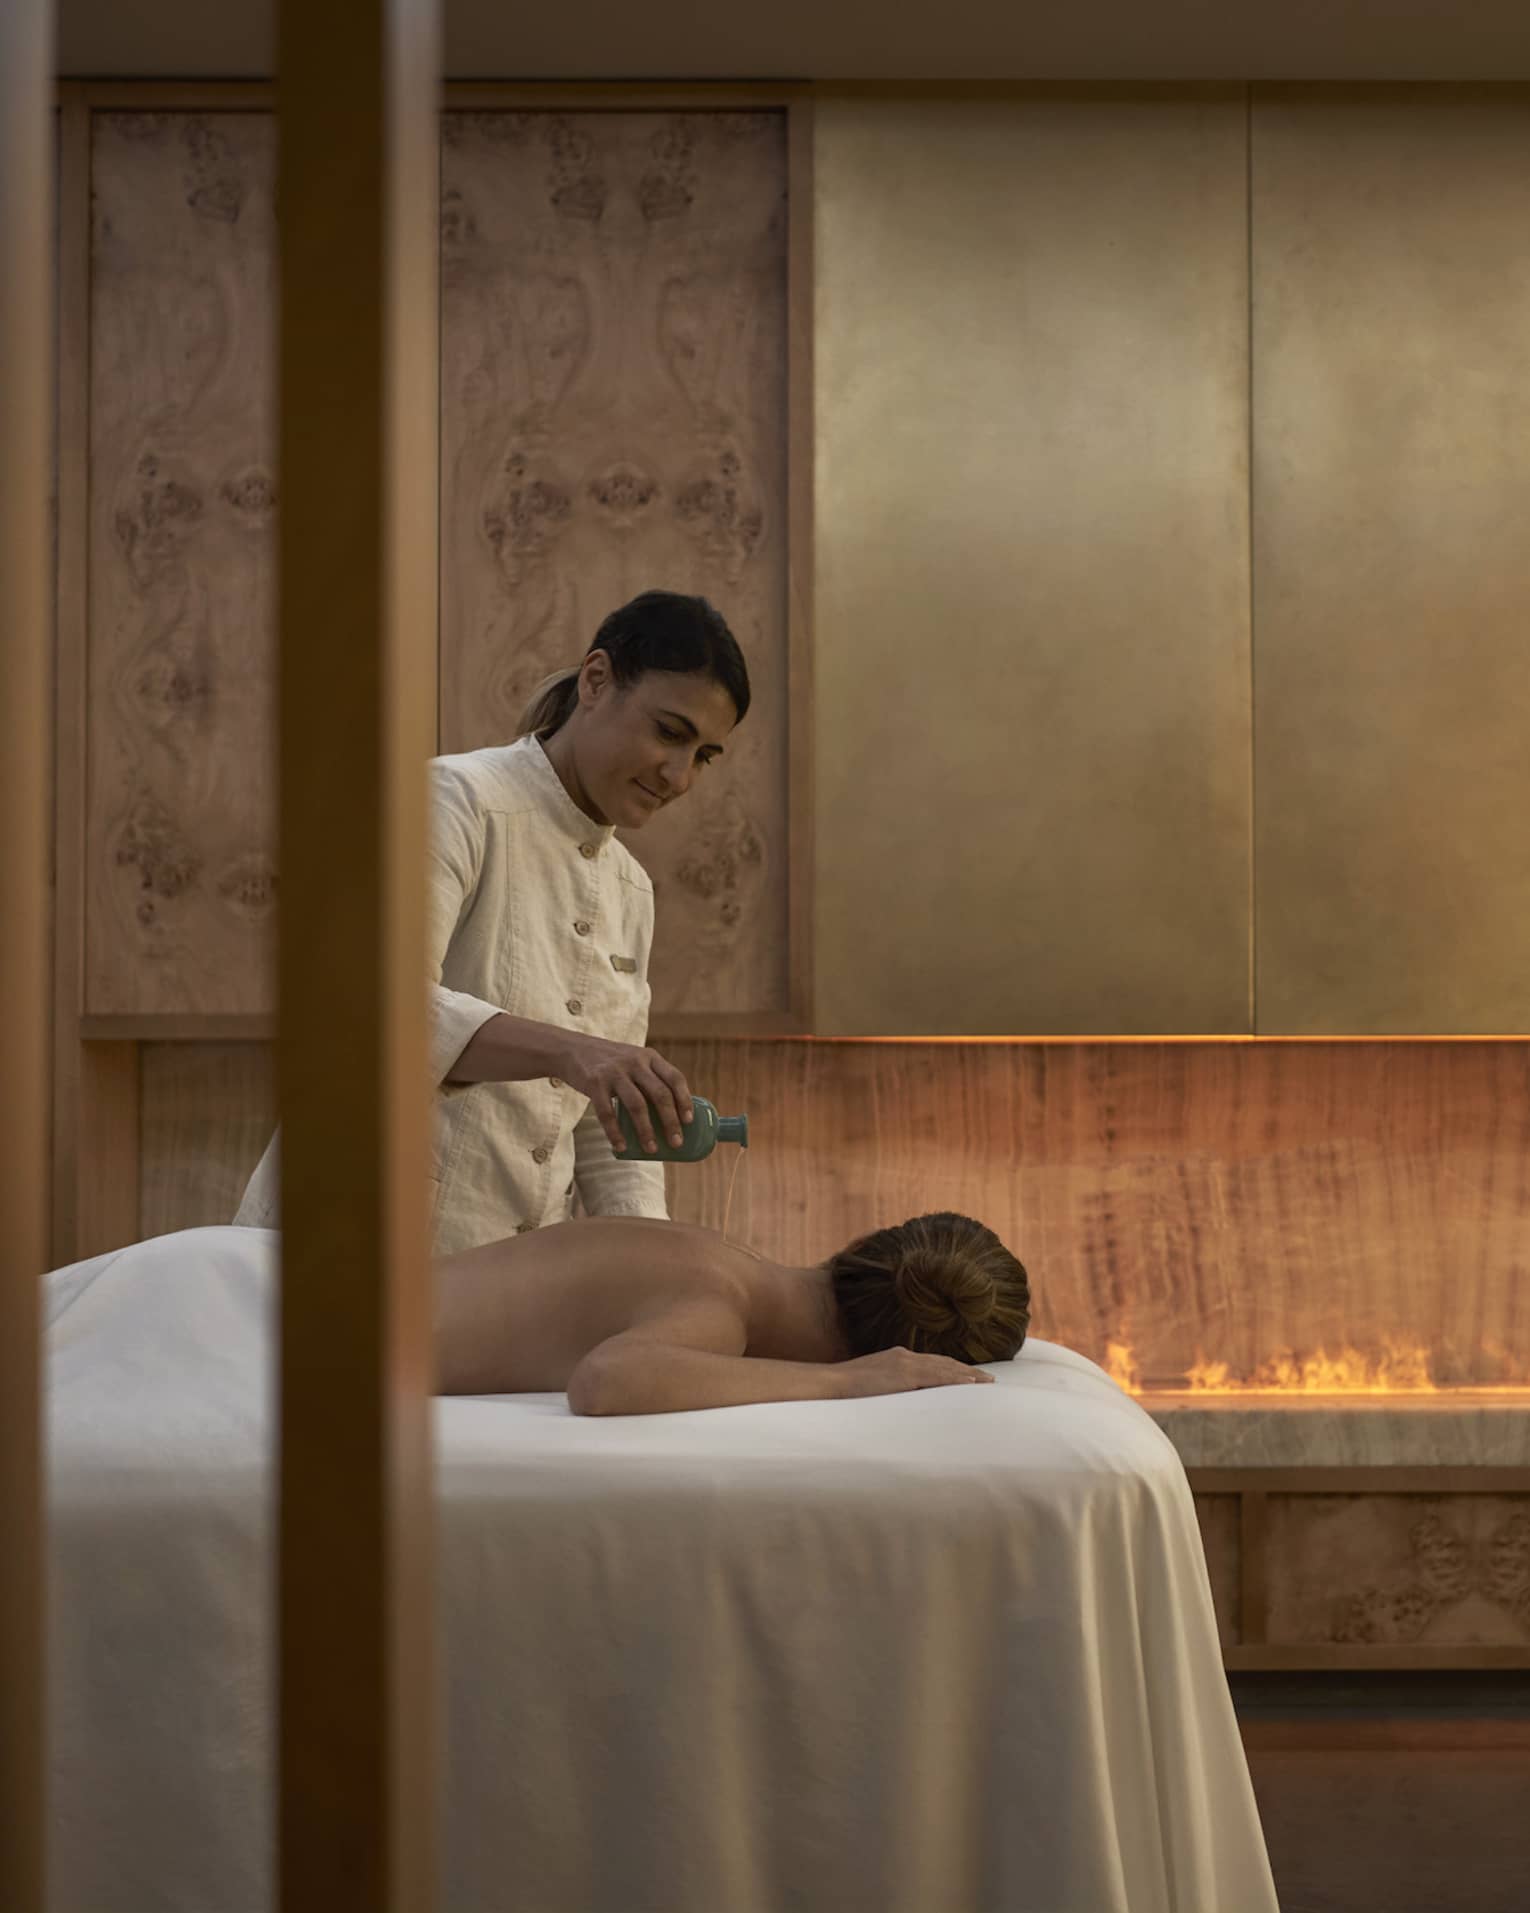 Spa therapist pours oil on back of person facedown on spa table